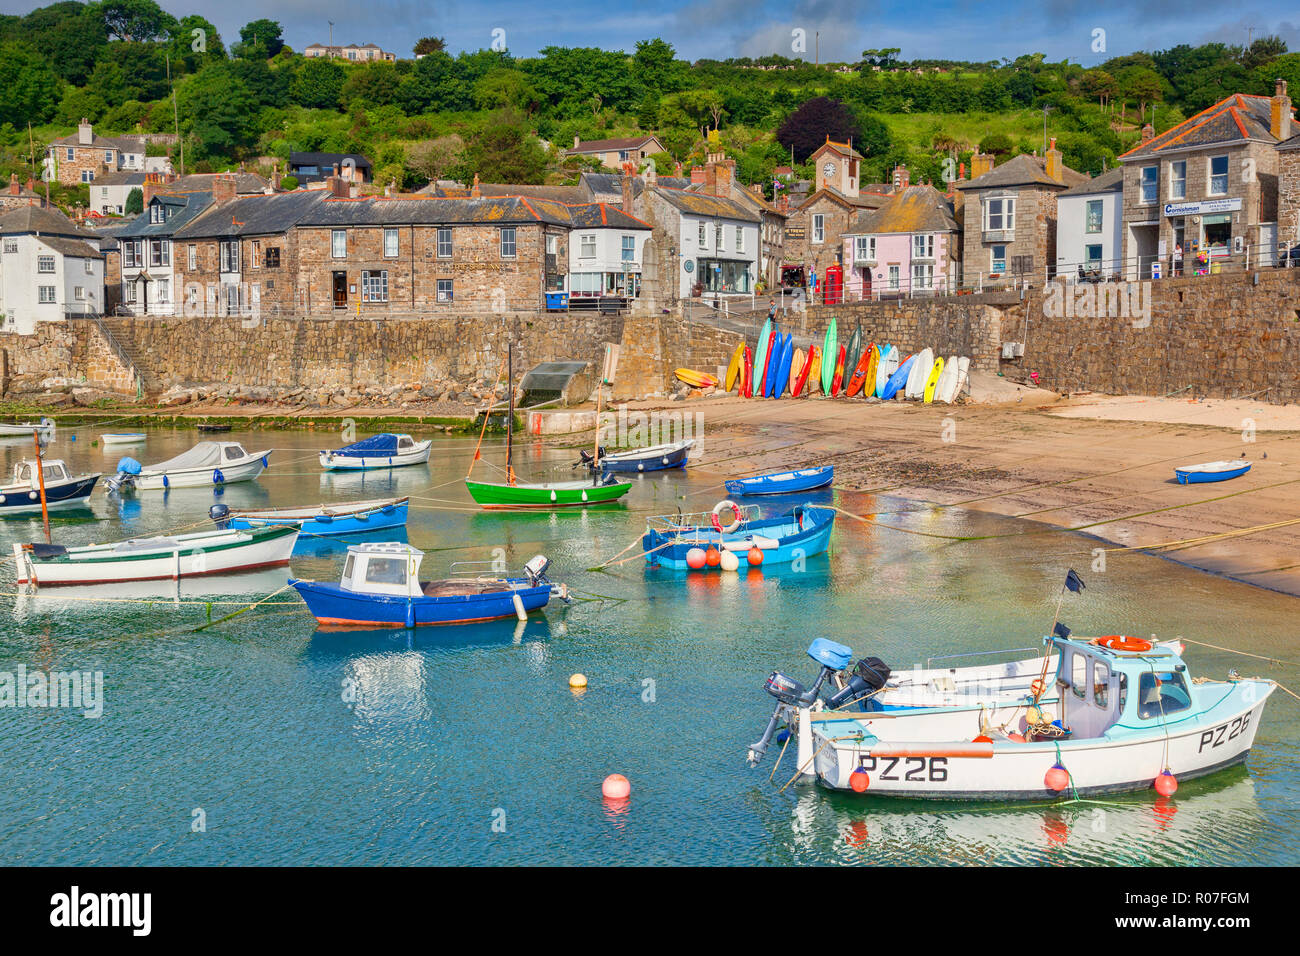 15 June 2018: Mousehole, Cornwall, UK - The harbour and village. Stock Photo